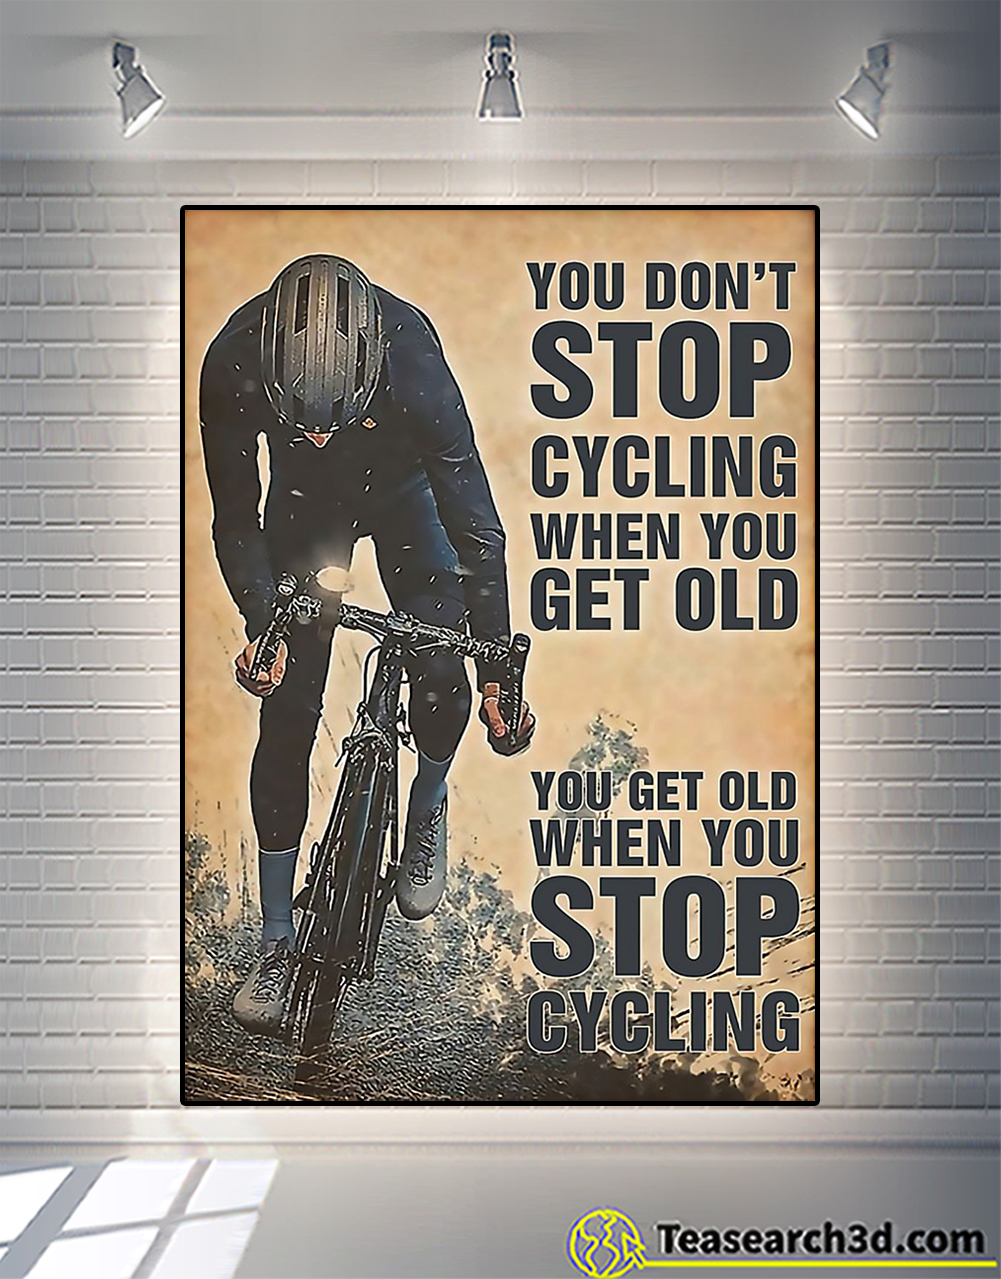 You don’t stop cycling when you get old poster